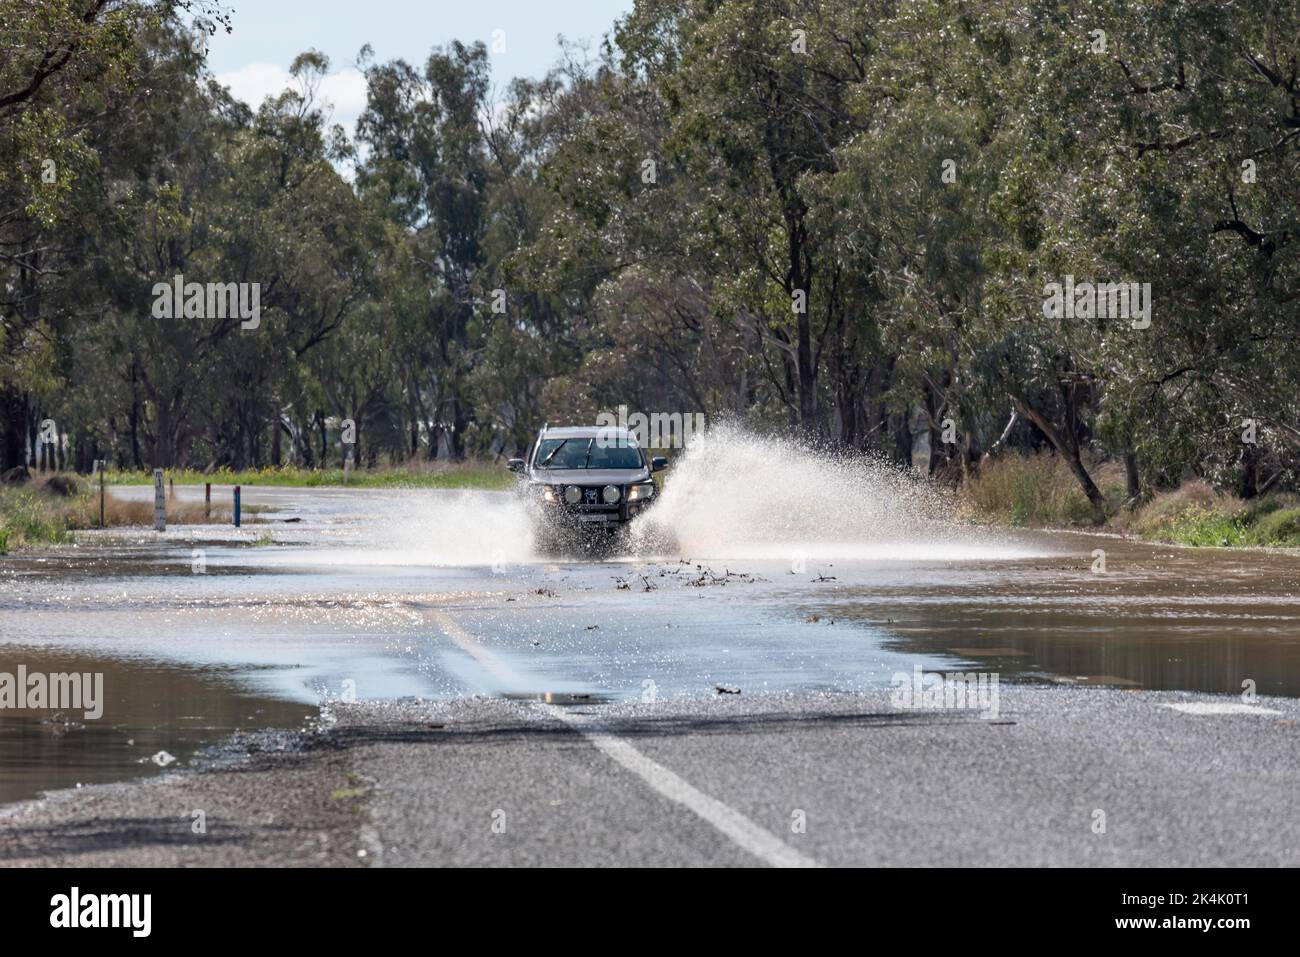 September 18, 2022, Kamilaroi Highway, Boggabri NSW, Australia: A four wheel drive vehicle makes its way along the flooded main road between Boggabri and Narrabri in north-western NSW. This and other nearby areas have been inundated after the Namoi River burst its banks. The road was being carefully monitored by local SES staff and was closed to all traffic later in the day due to increased water levels. Credit, Stephen Dwyer, Alamy Stock Photo